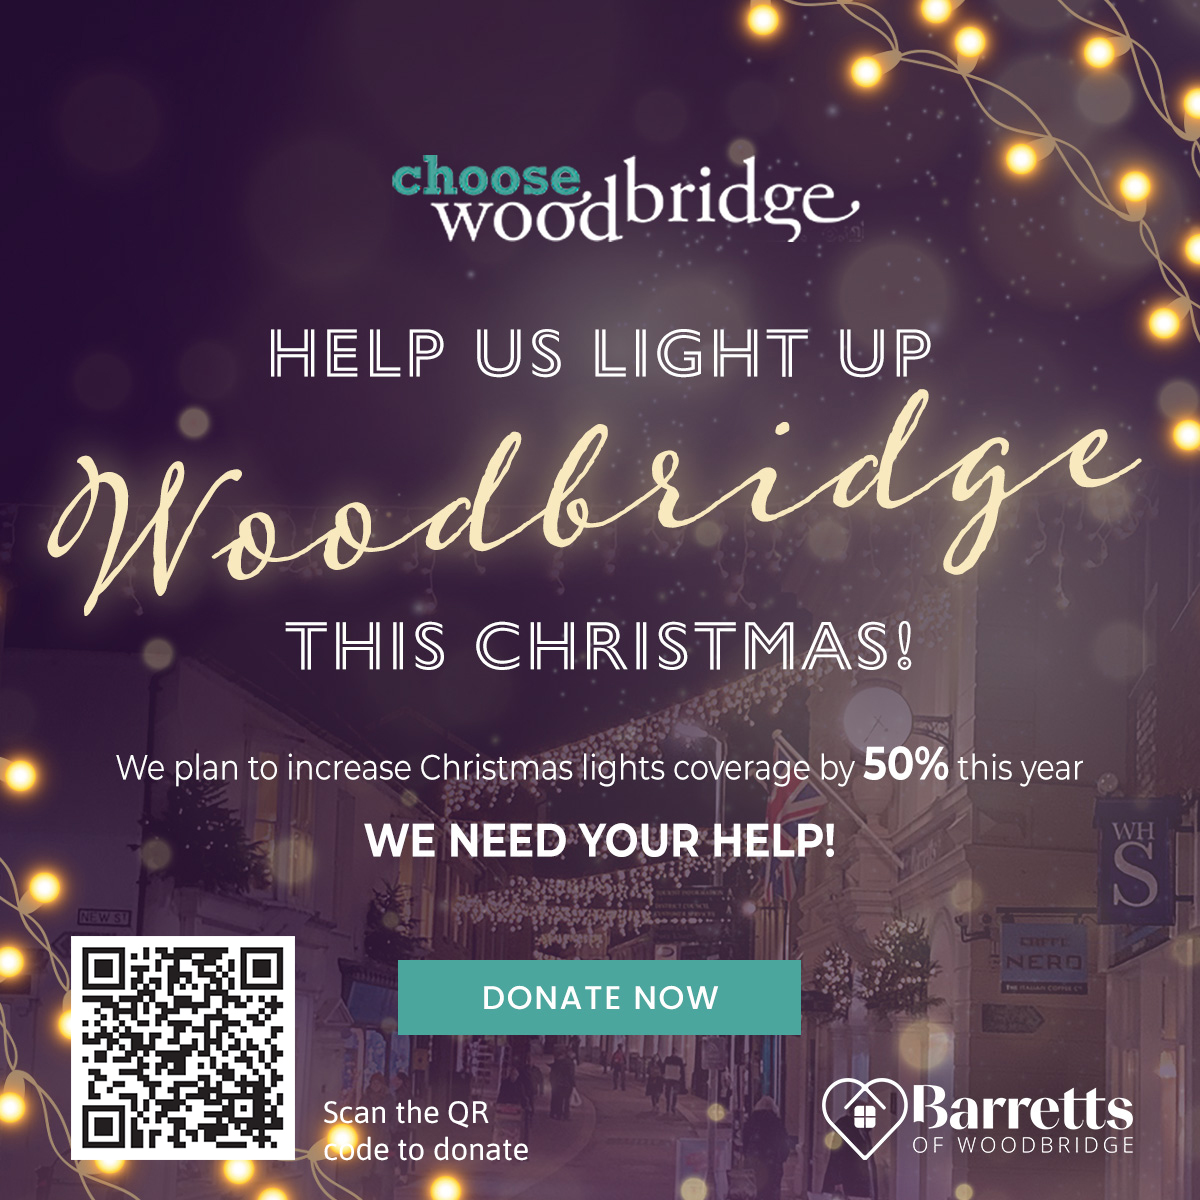 We need your help this Christmas!